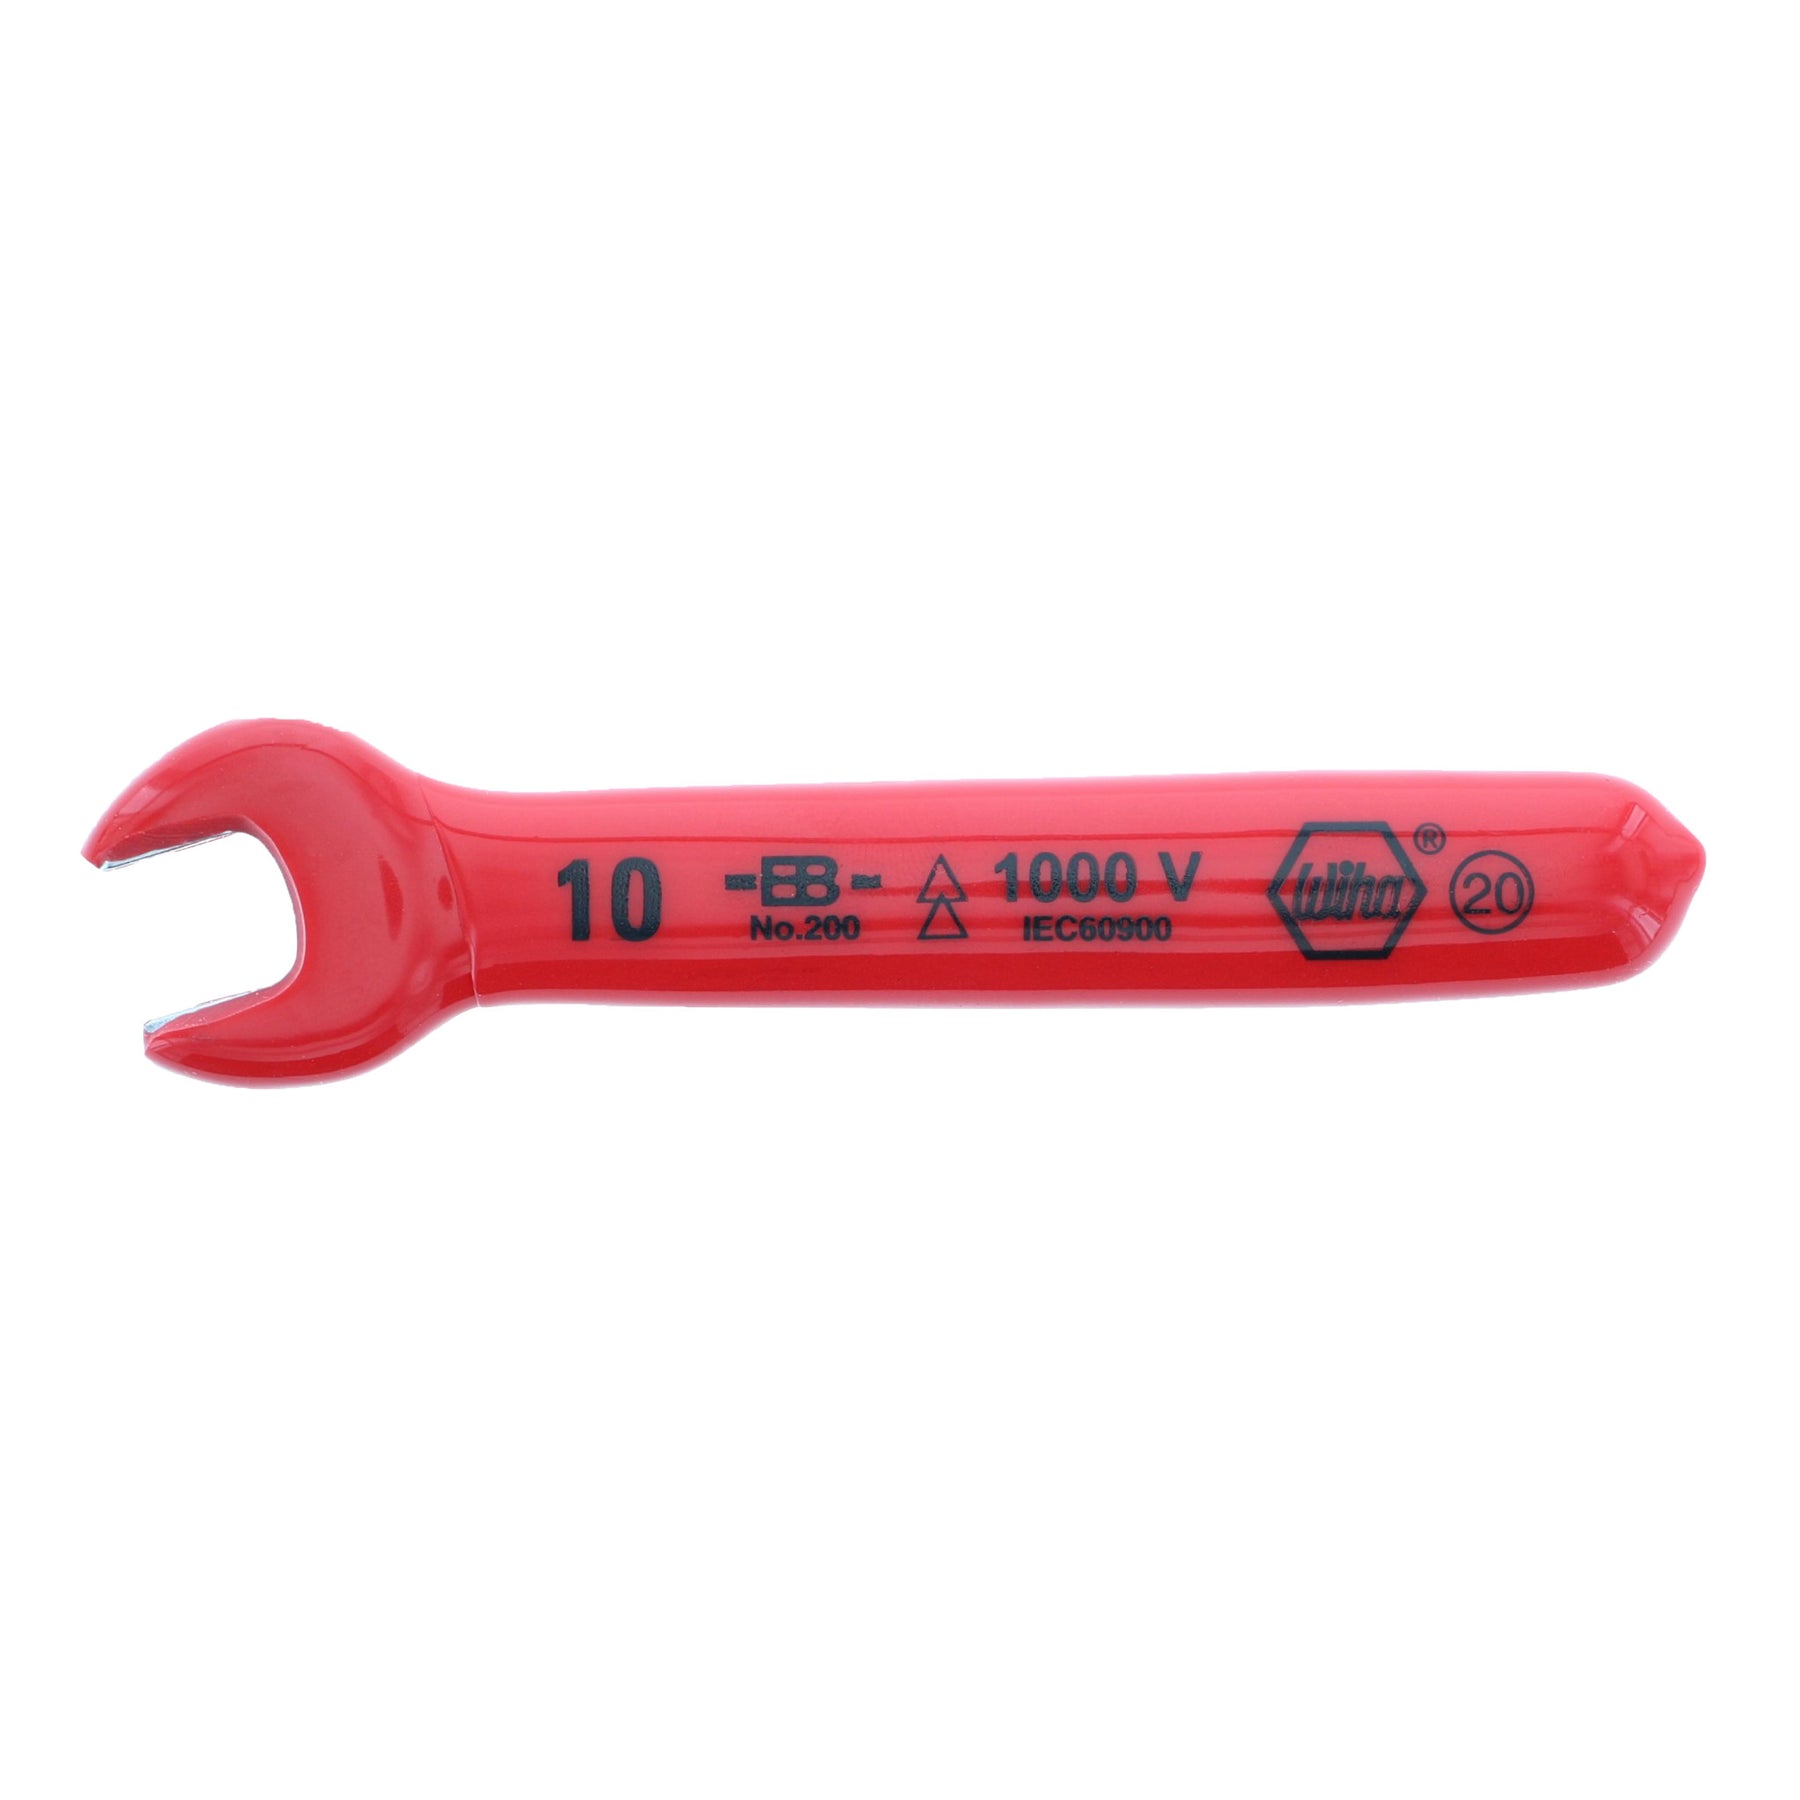 Wiha 20010 Insulated Open End Wrench 10.0mm